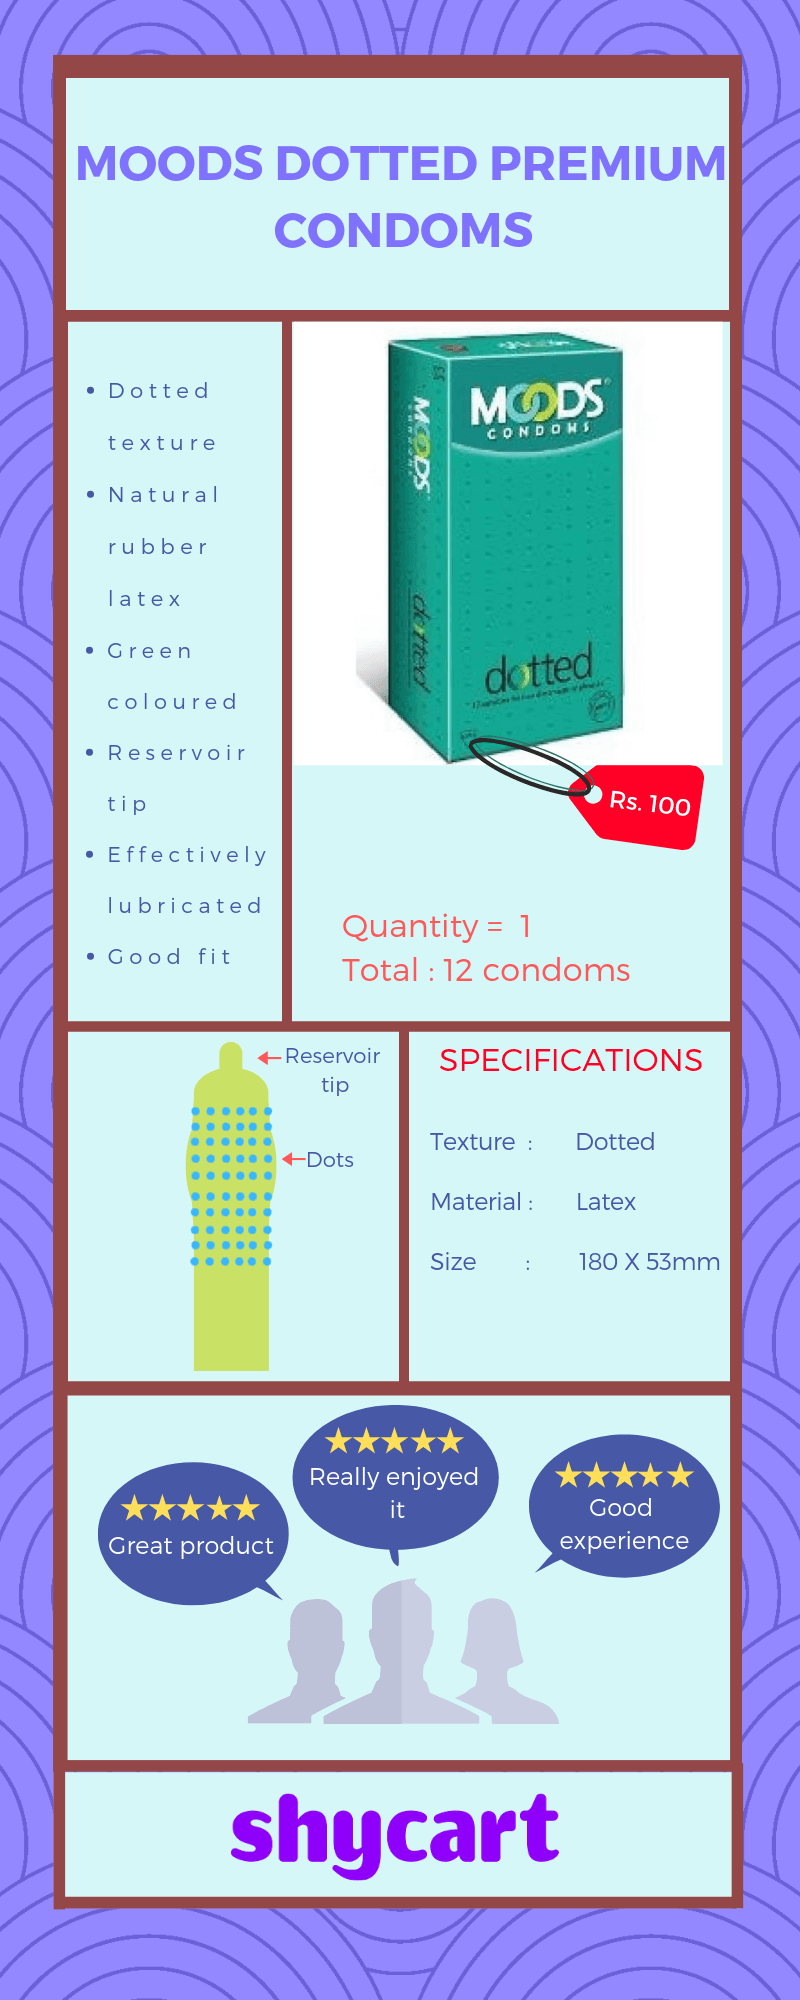 Overview of Moods dotted condoms